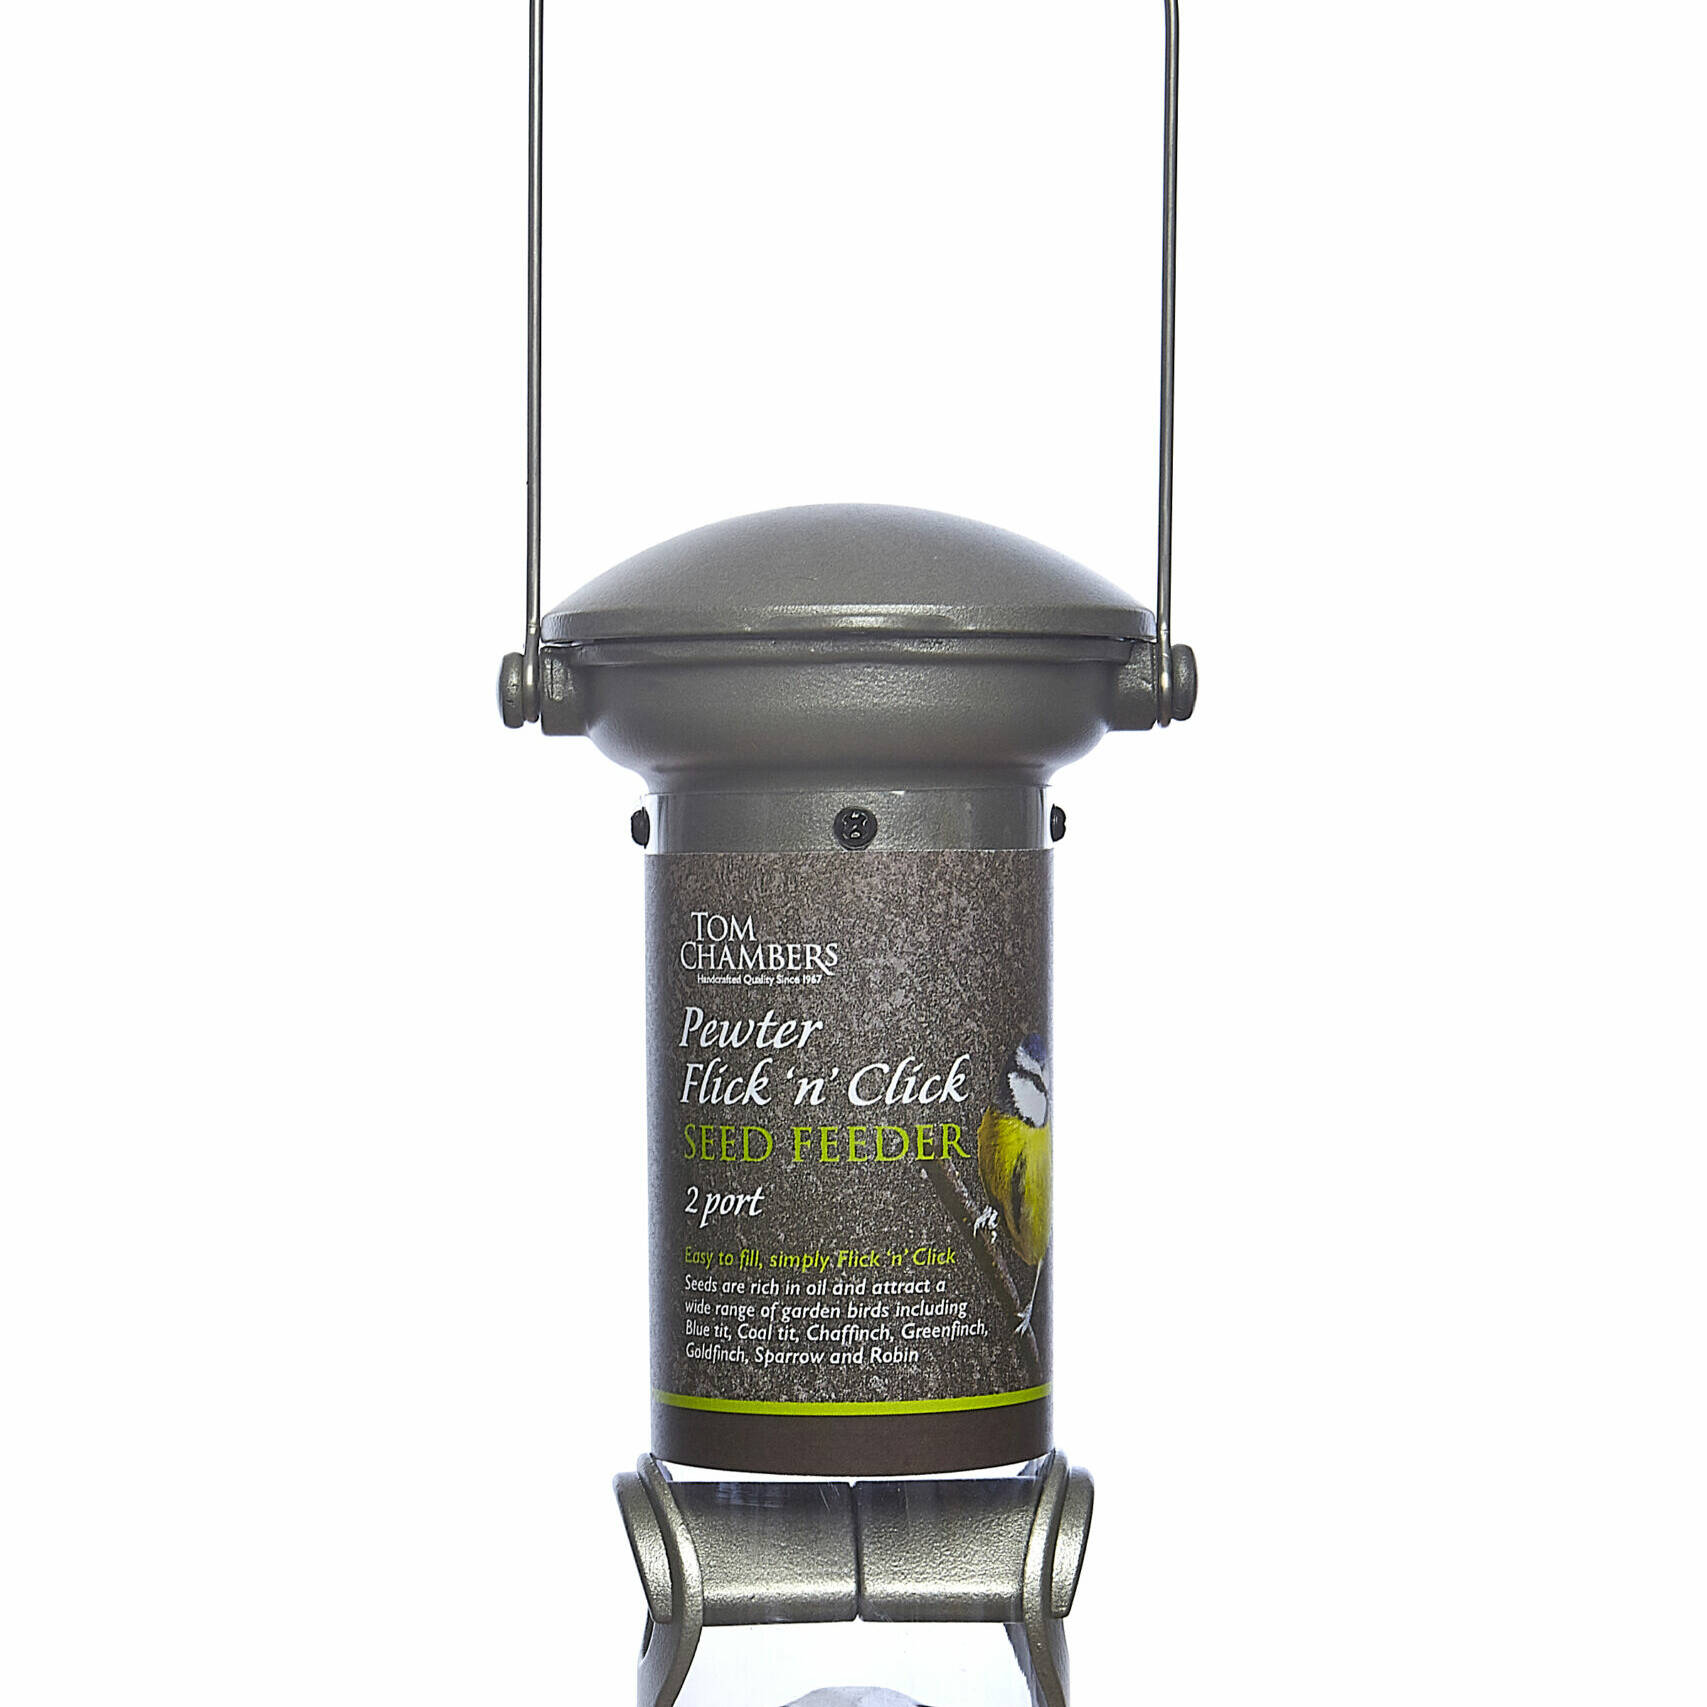 Tom chambers Pewter Flick 'n' Click Seed Feeder - 2 port